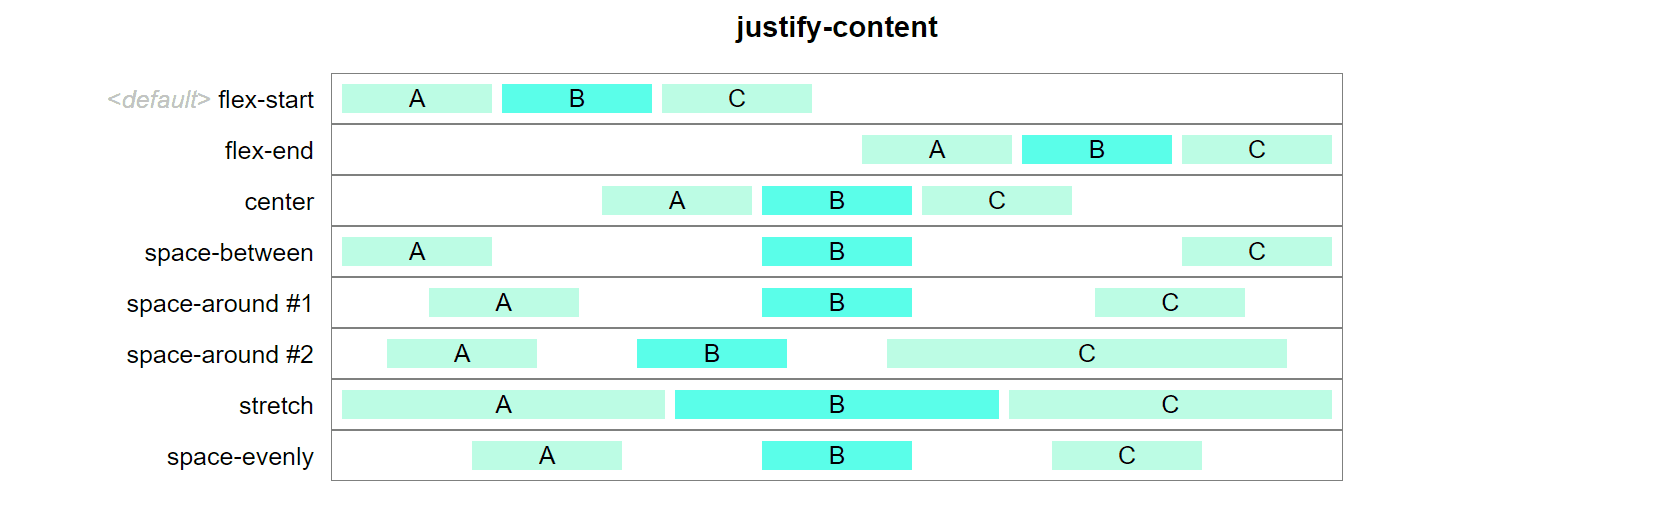 flex justify content all cases examples